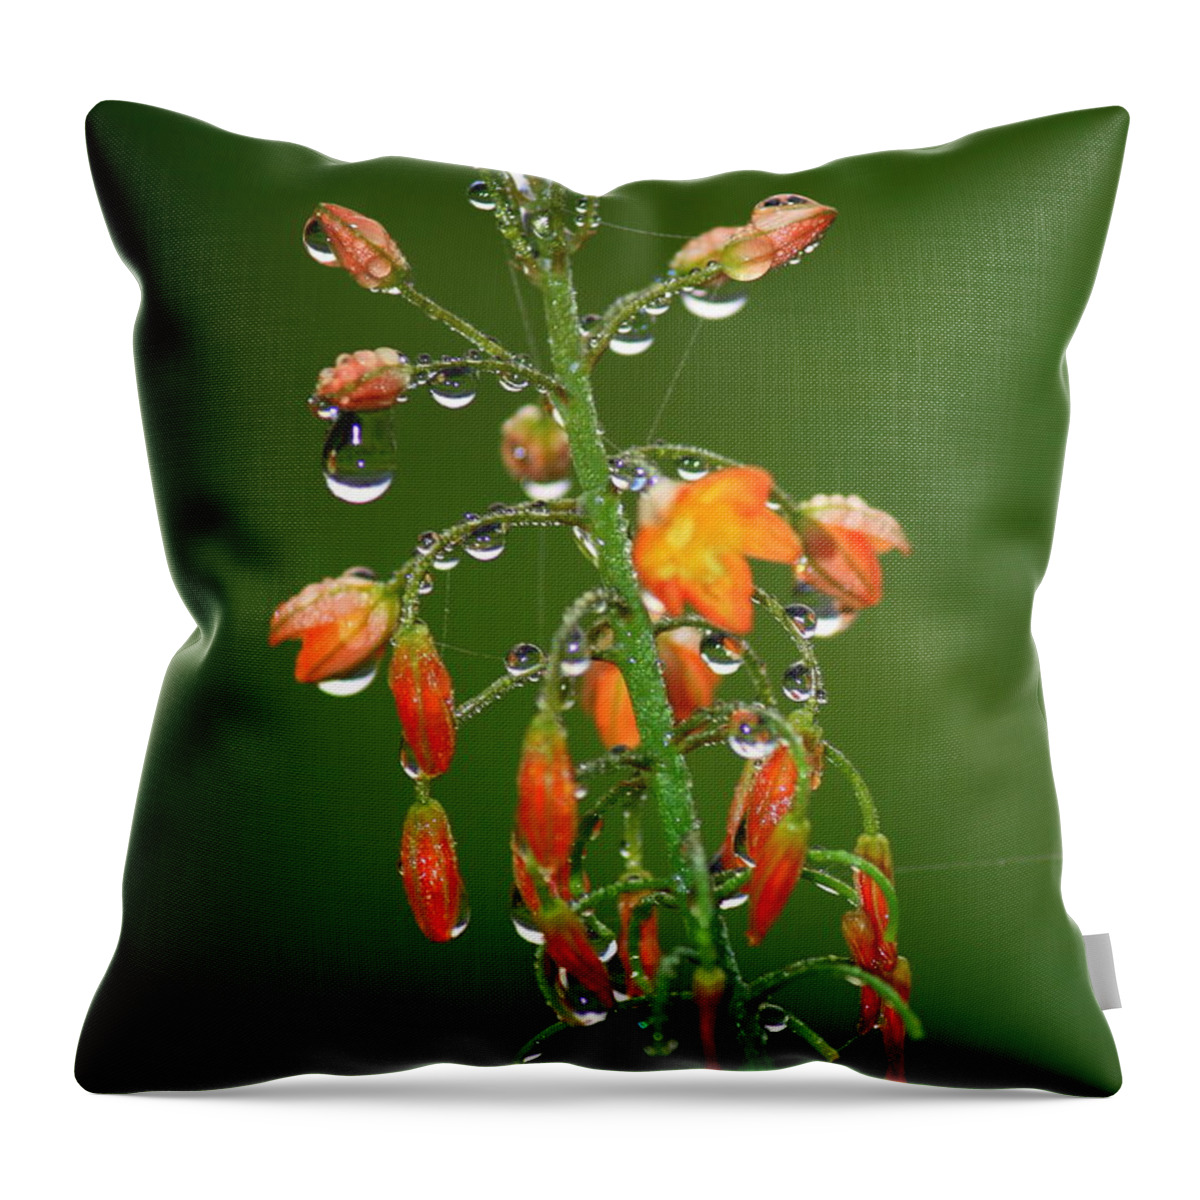 Green And Orange Throw Pillow featuring the photograph Waiting for Sunshine by Carol Groenen